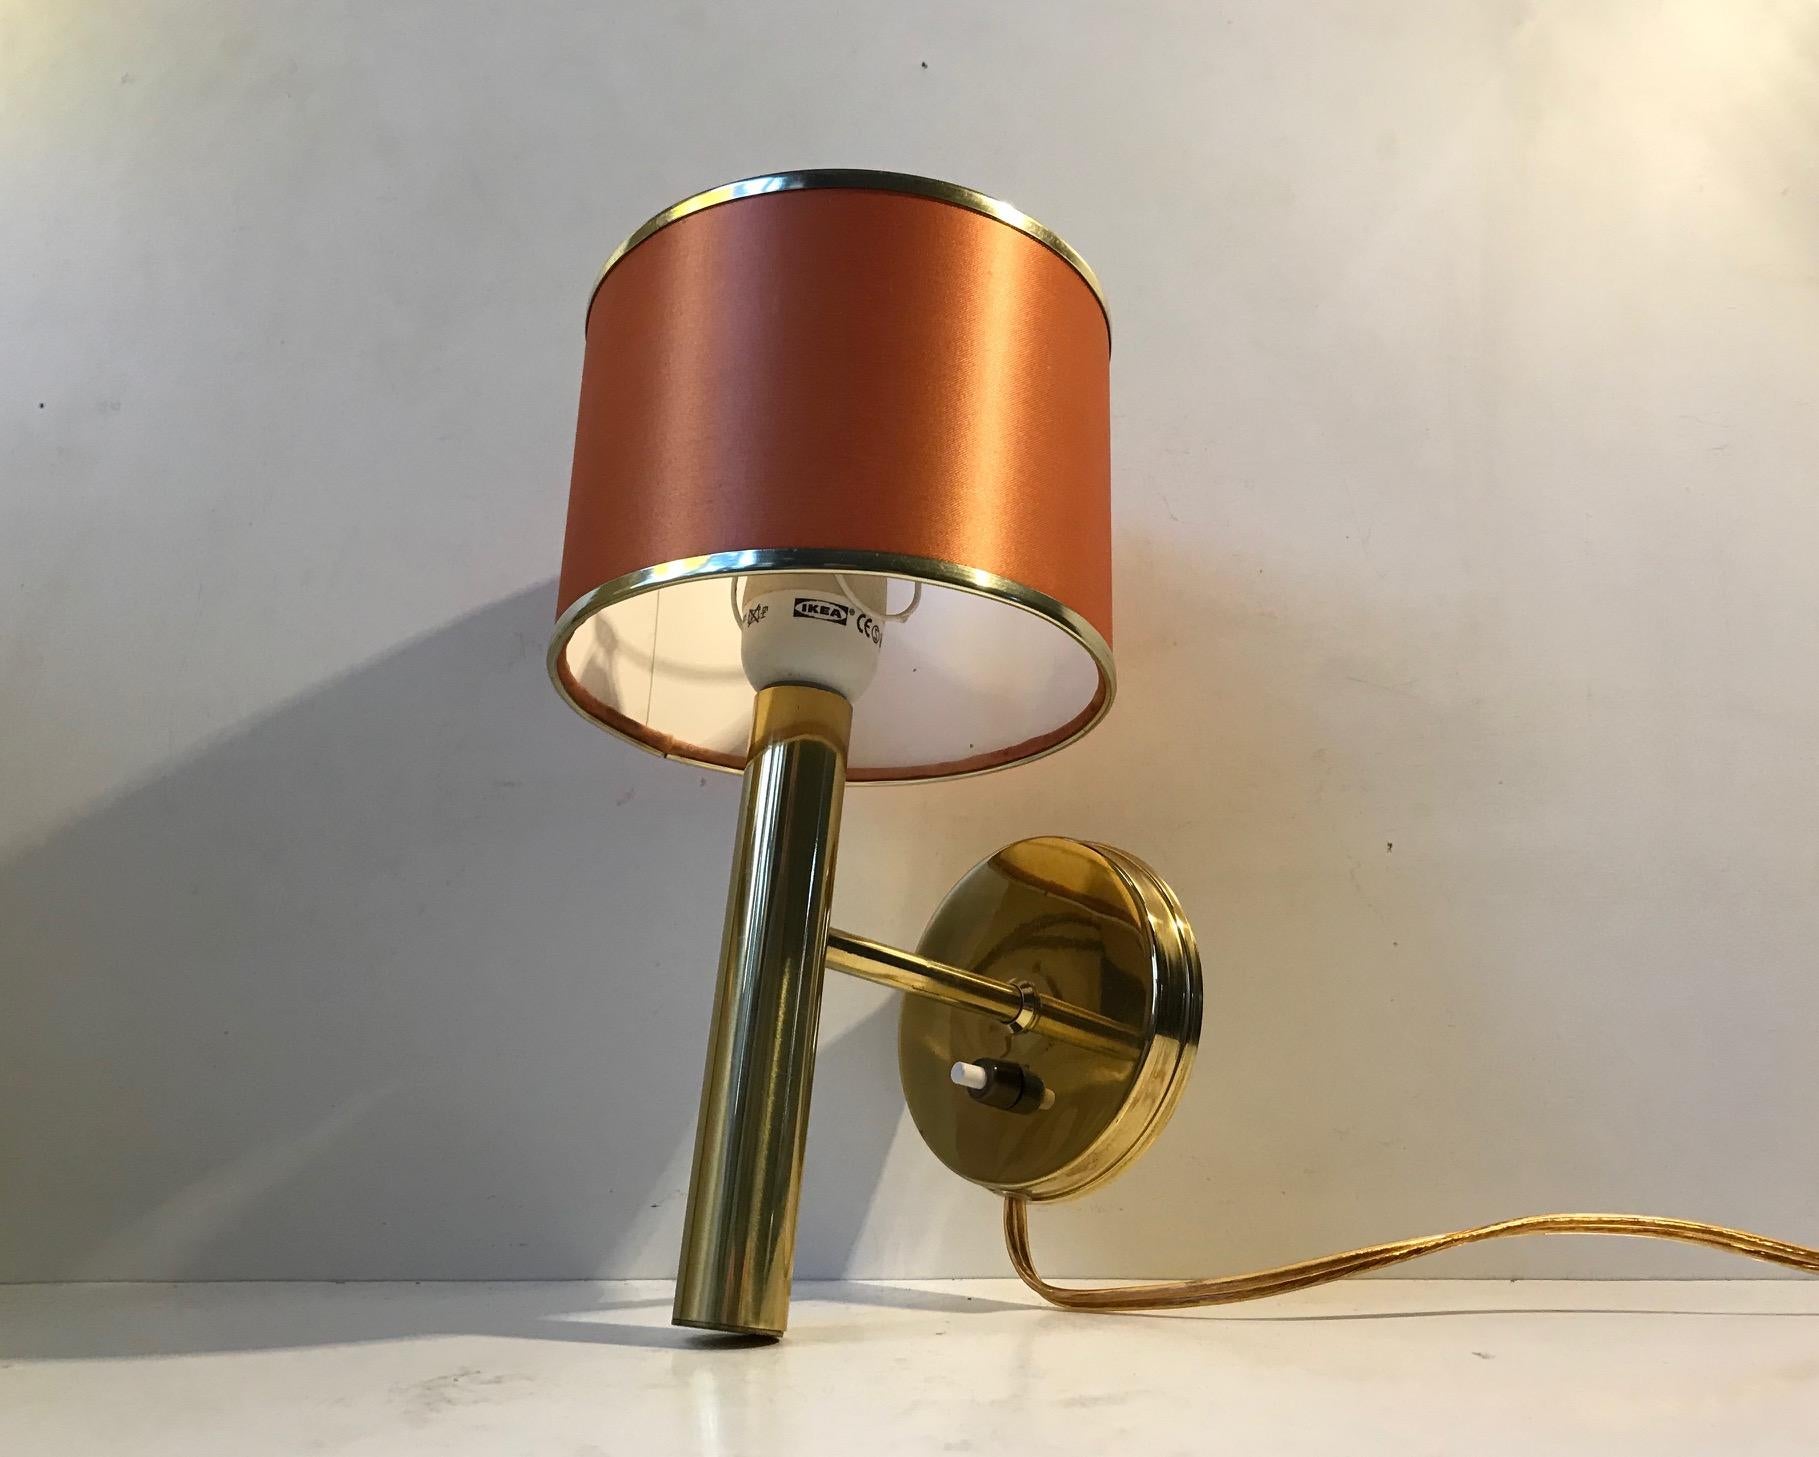 Fixed wall light designed and manufactured by Svend Mejlstrøm in Denmark during the 1960s. It’s made from polished brass and retains its peach colored textile shade that came with it originally.